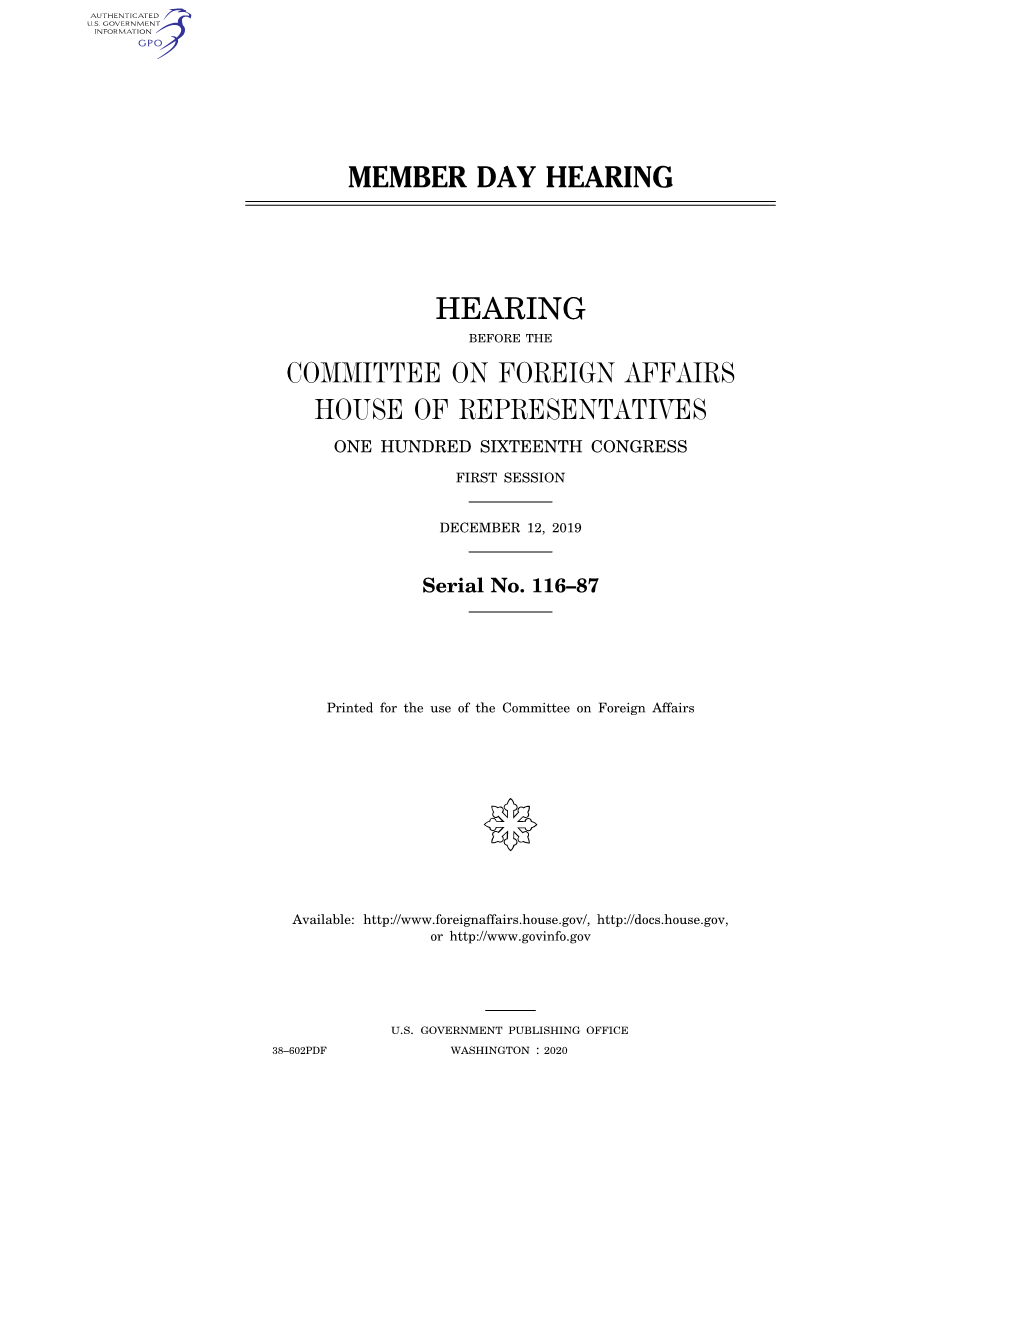 Committee on Foreign Affairs House of Representatives One Hundred Sixteenth Congress